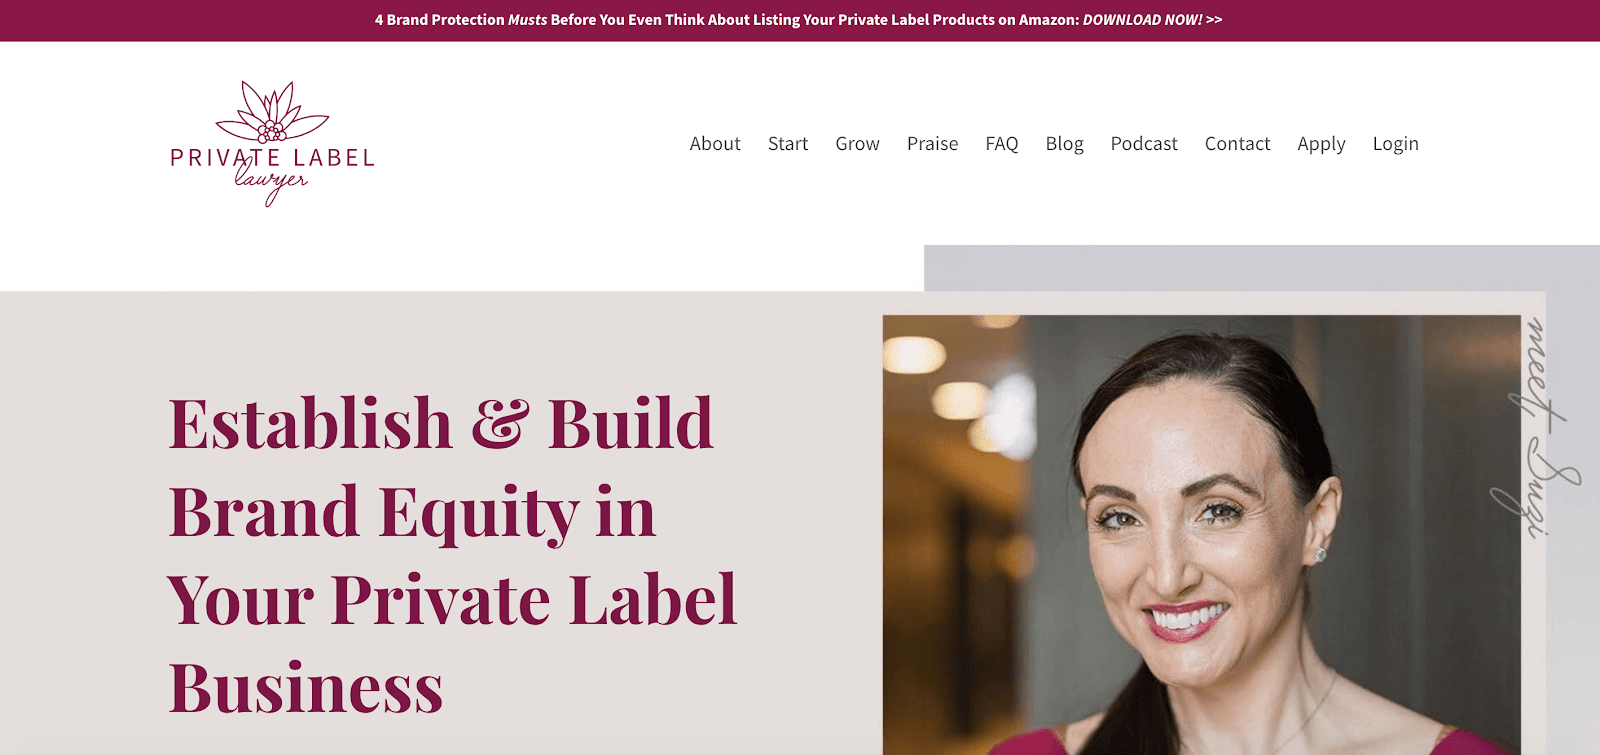 Hire A Prive Label Manufacturer Lawyer